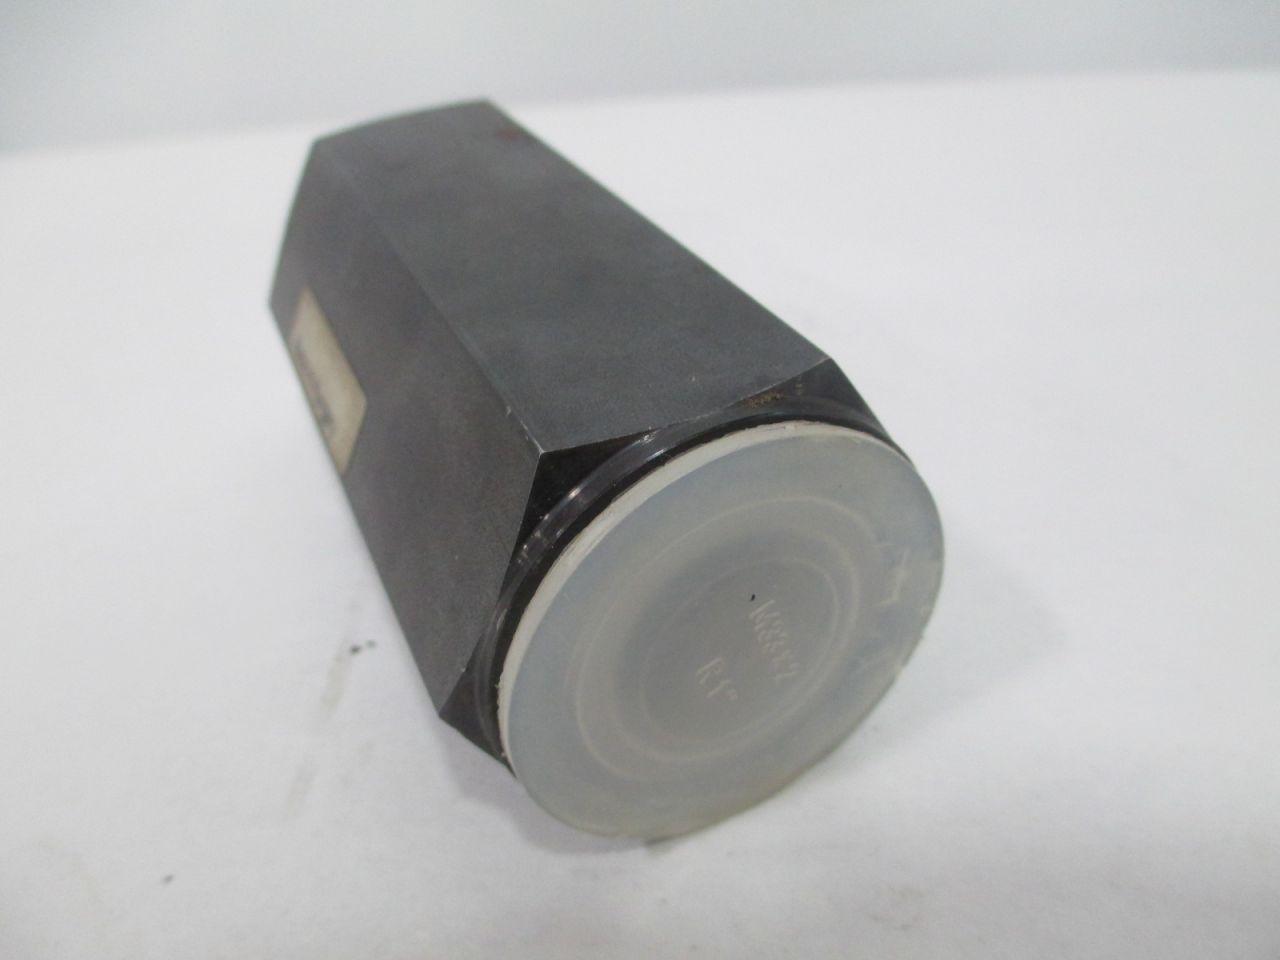 Details about   New Rexroth S20A1.0 5 5 Hydraulic Check Valve S 20 A 1.0 